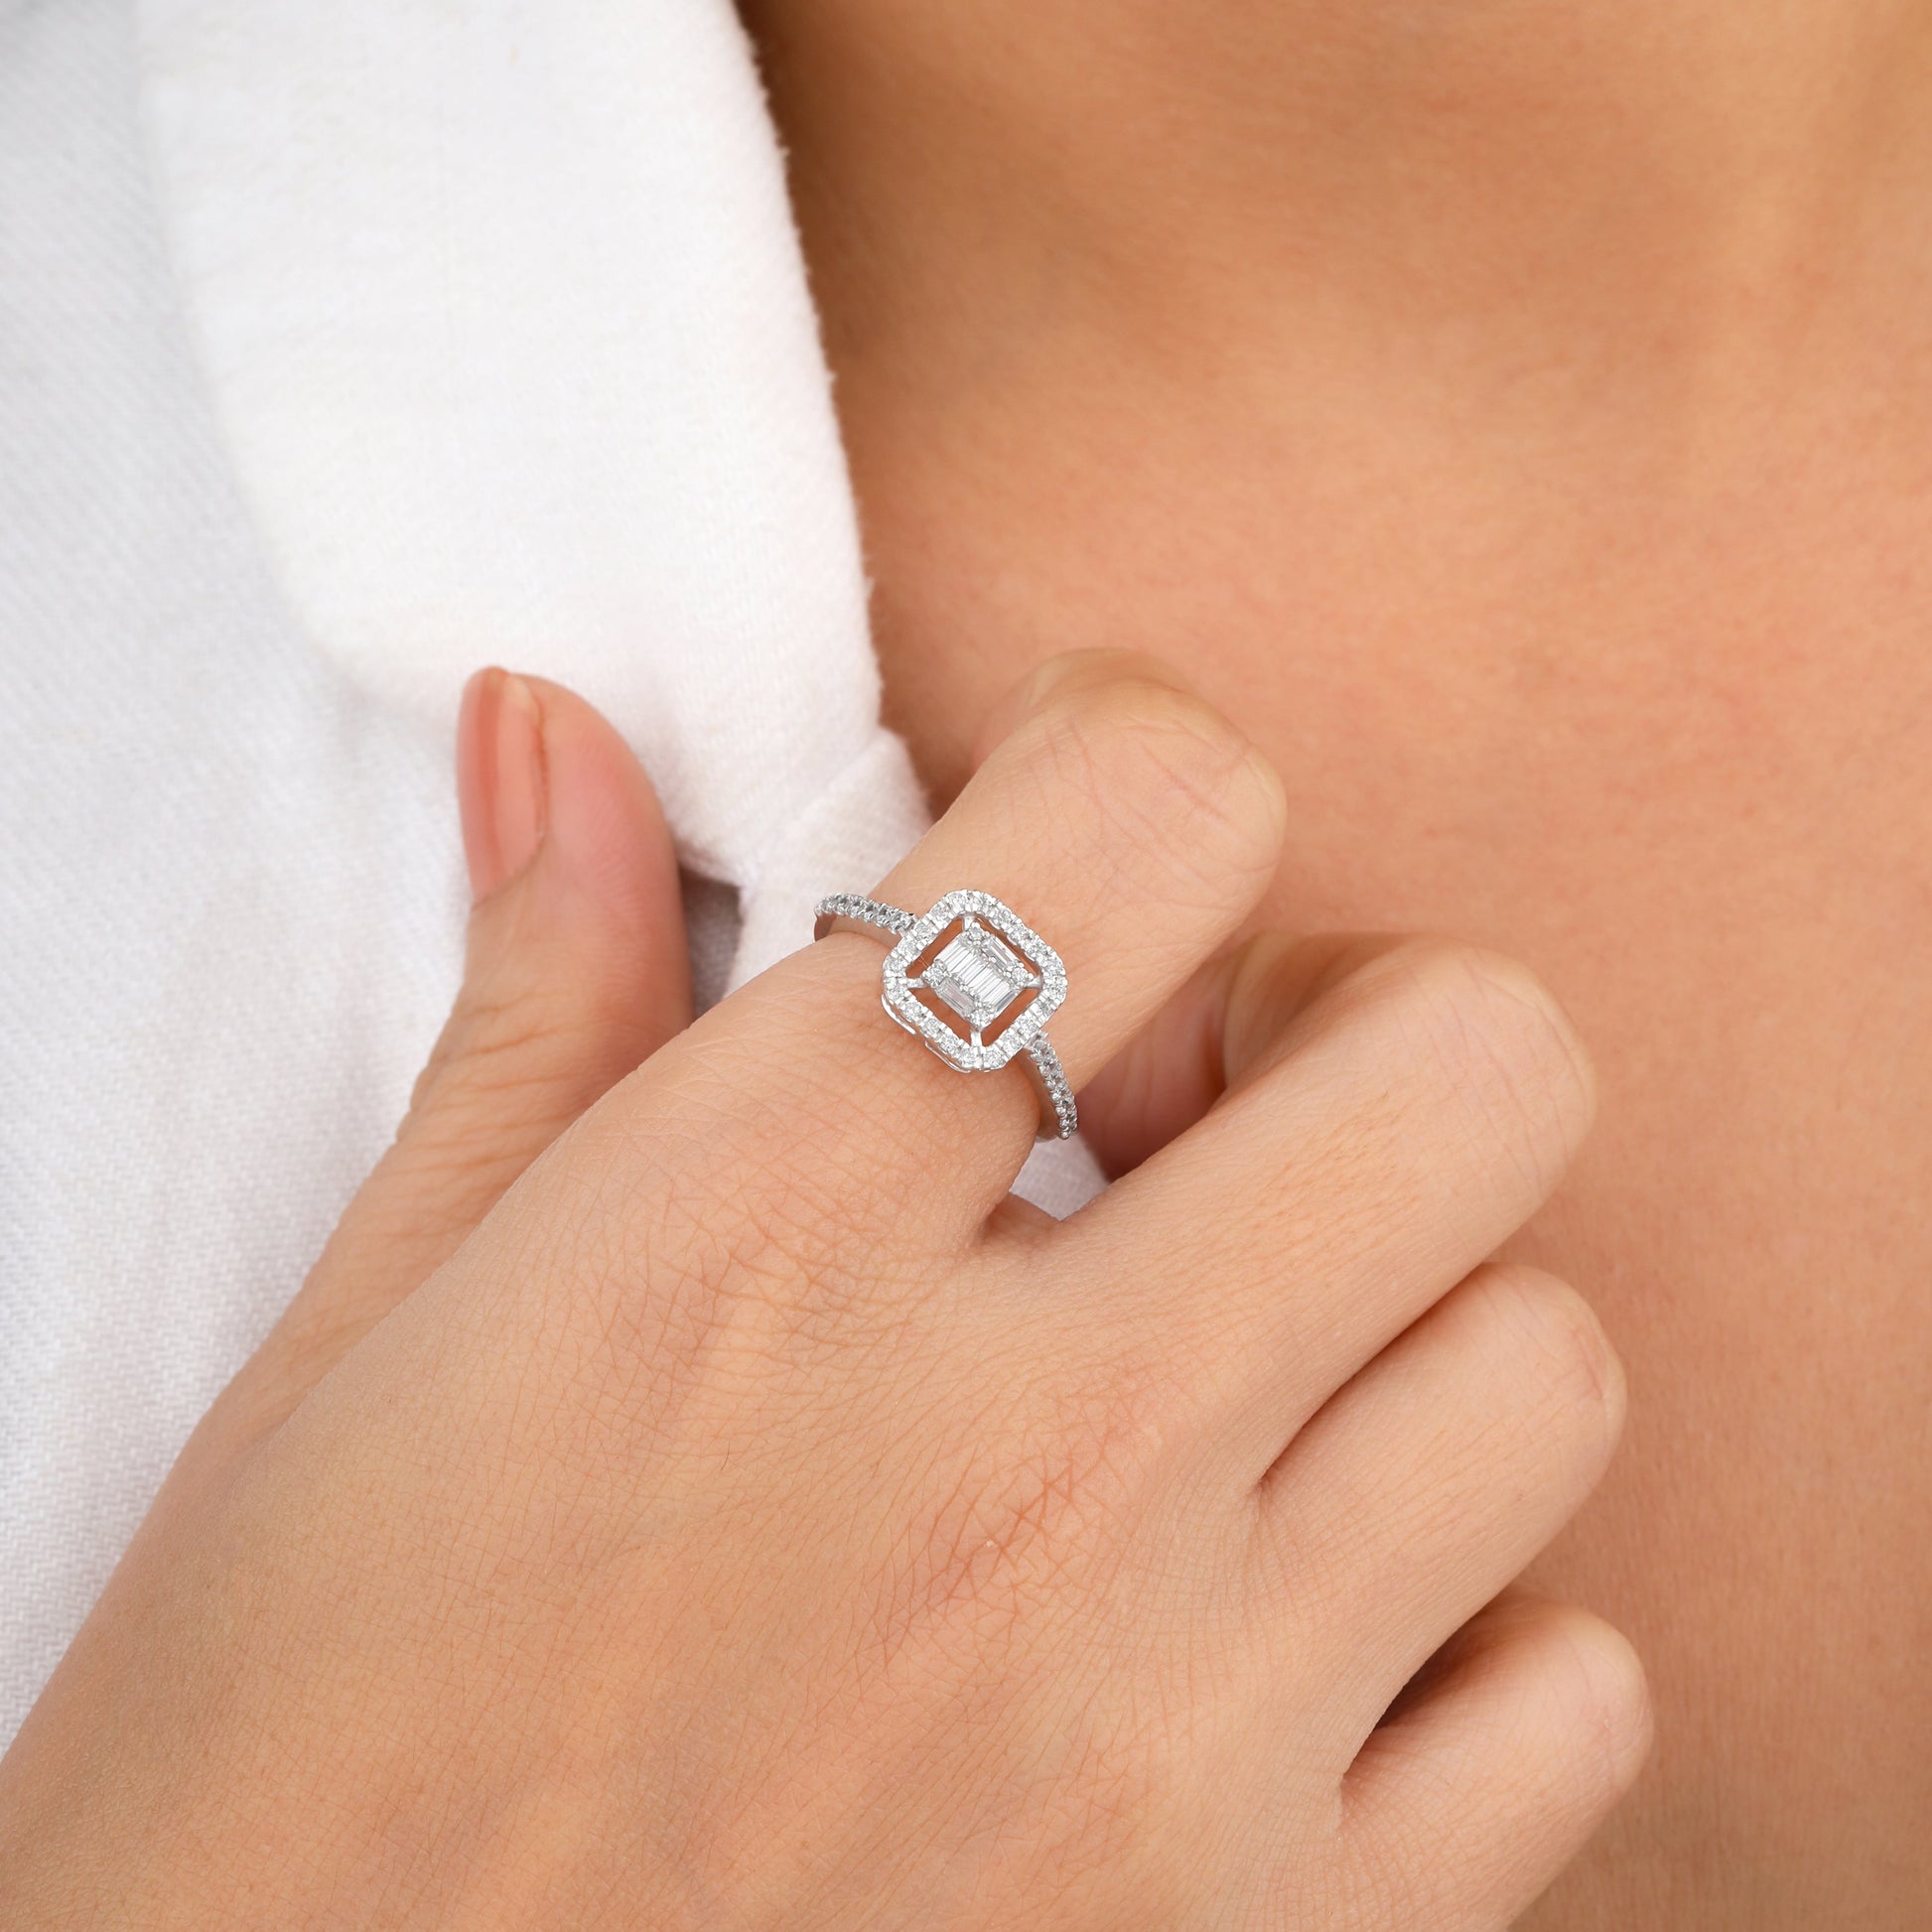 Square shaped halo engagement ring